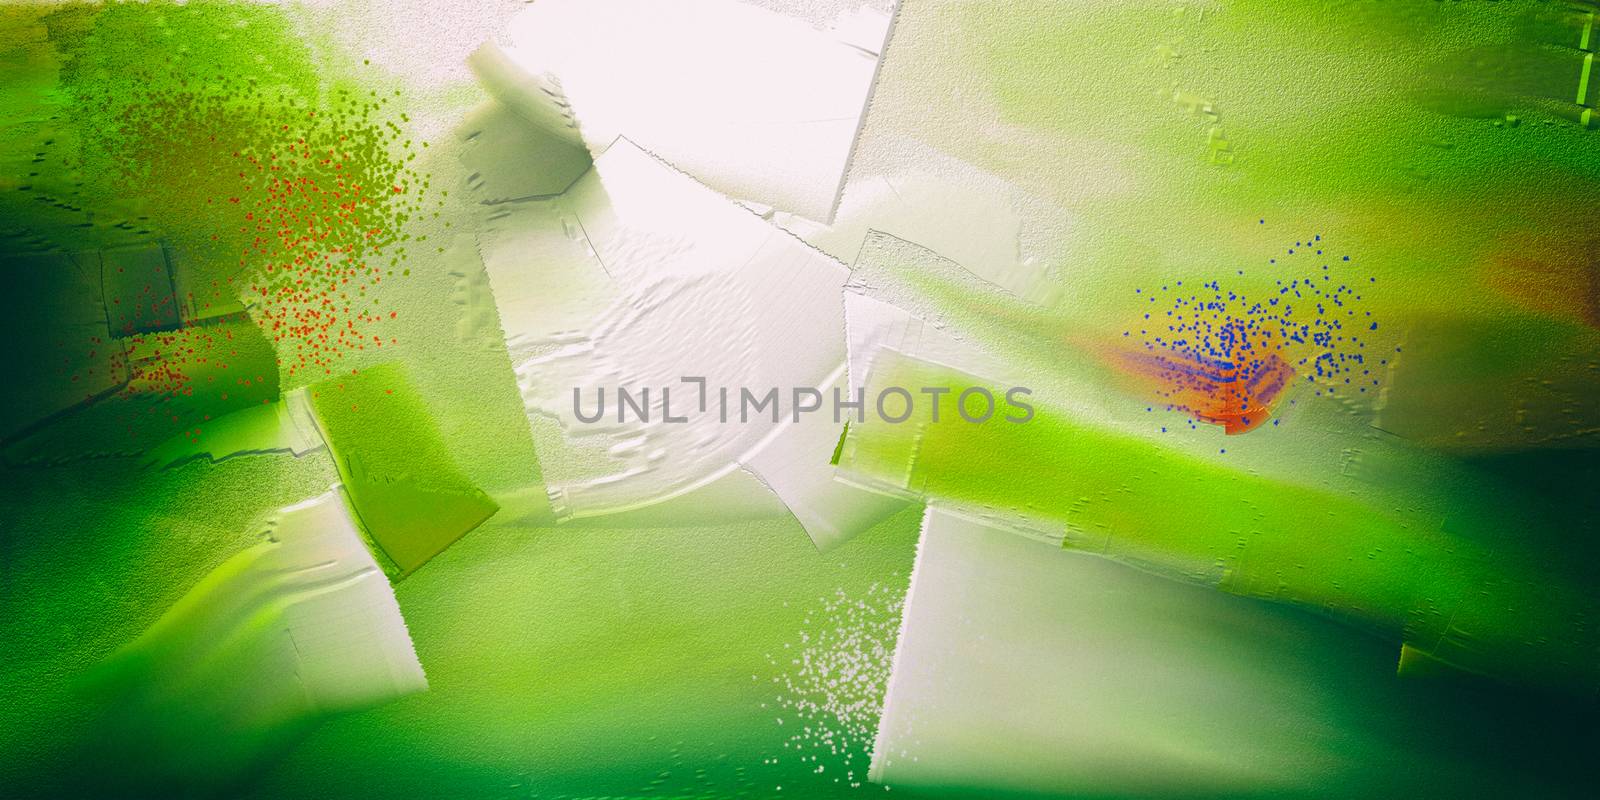 Abstract Painting in green colors